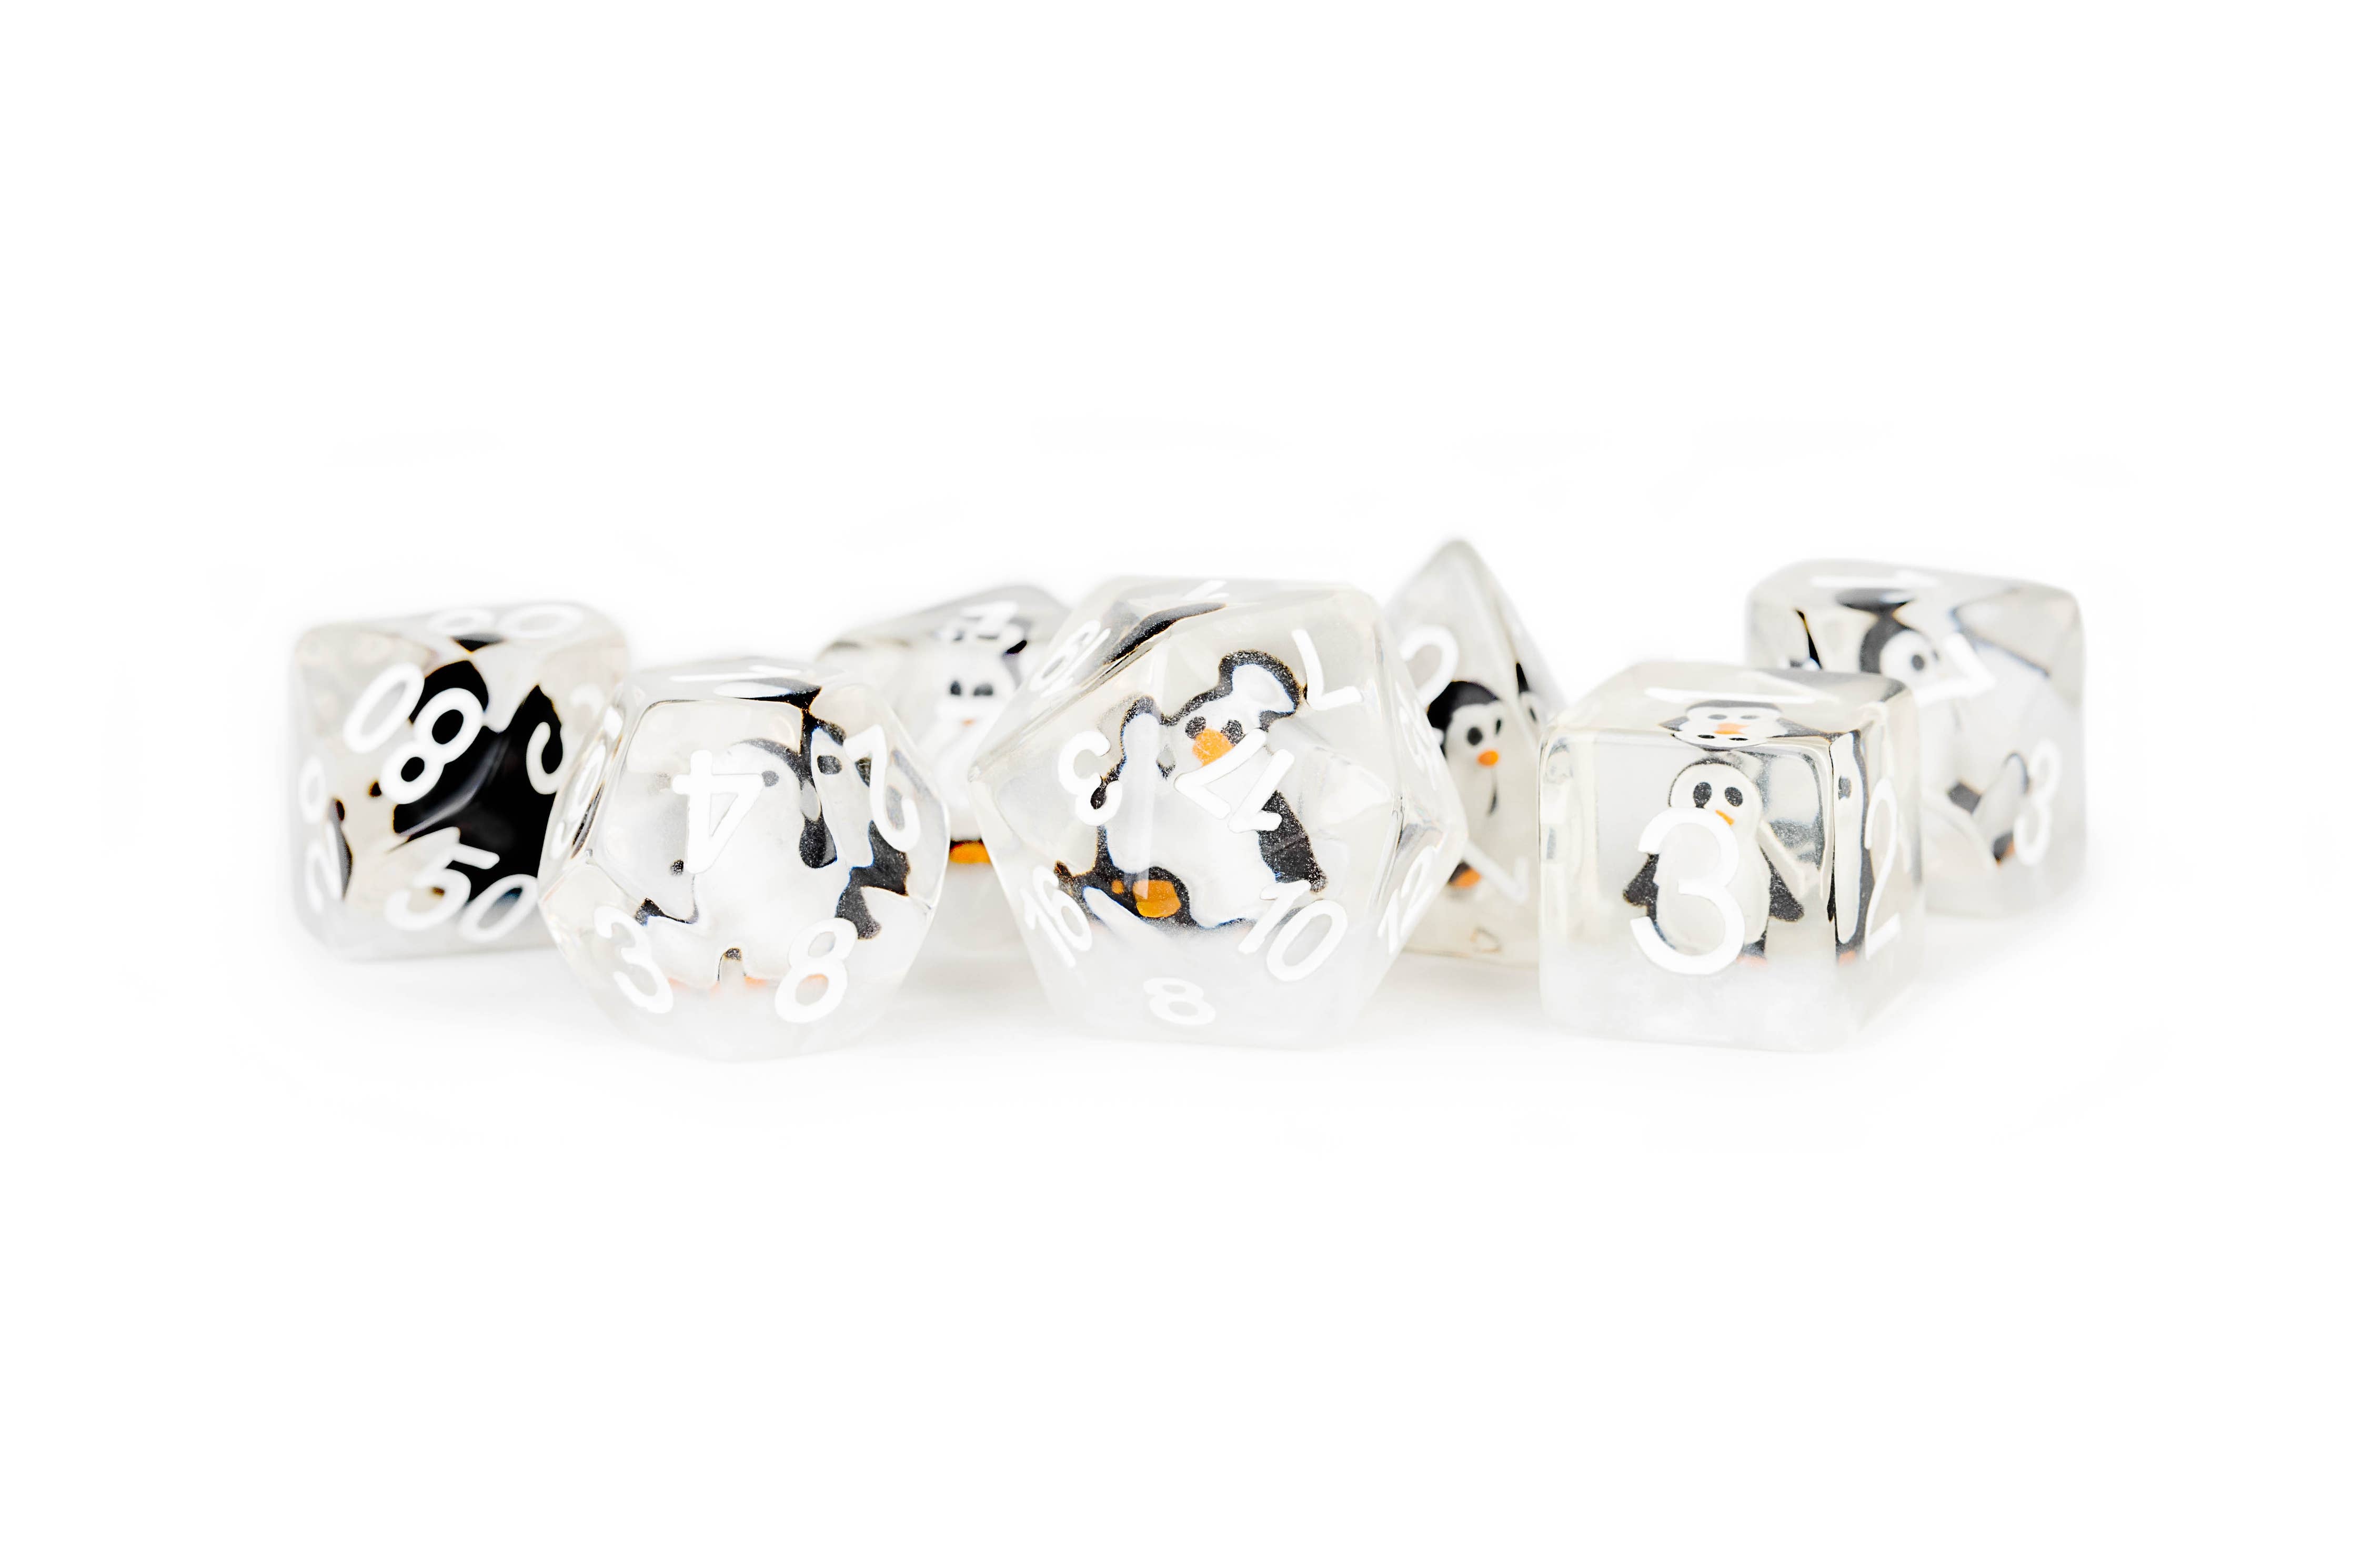 Penguin Dice Resin Polyhedral Dice Set: Perfect for DND Game - Bards & Cards